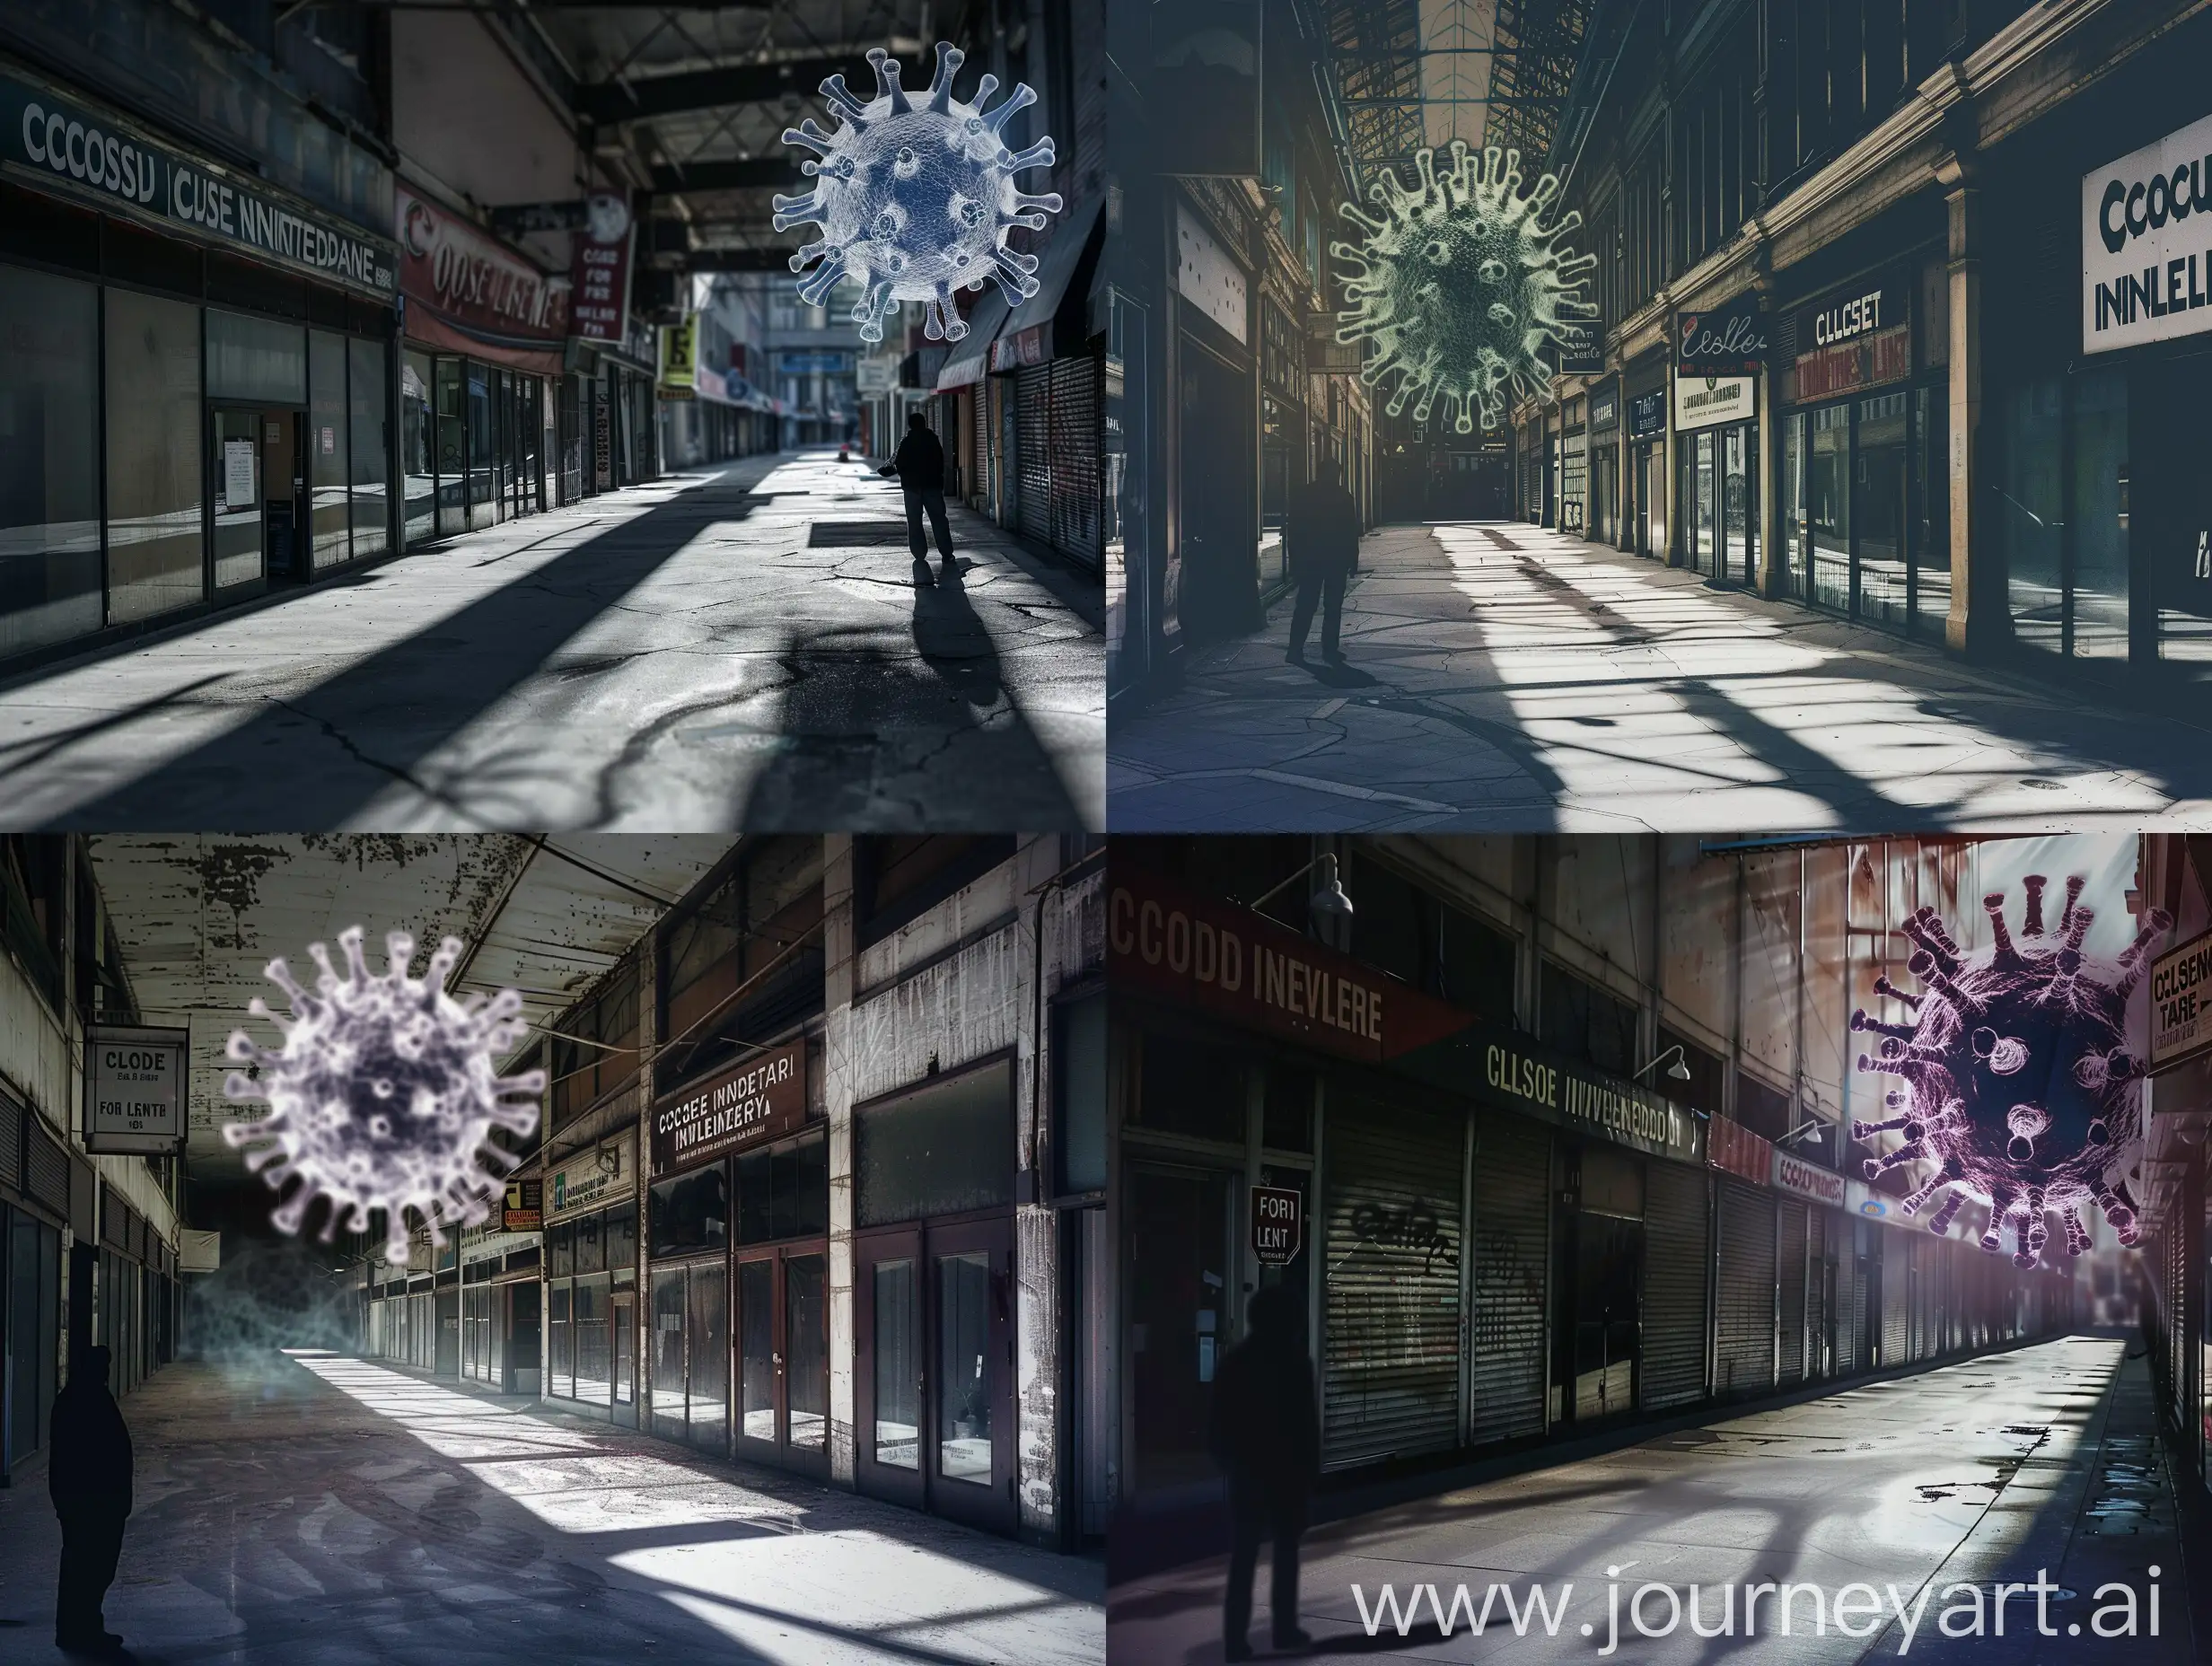 A deserted street lined with closed storefronts, their windows dark and signs displaying 'Closed Indefinitely' or 'For Lease.' Shadows cast by the empty buildings evoke a sense of uncertainty and hardship. In the background, a faint image of the virus looms, symbolizing the ongoing threat. A lone figure, representing a struggling business owner, stands in front, shoulders slumped in resignation.